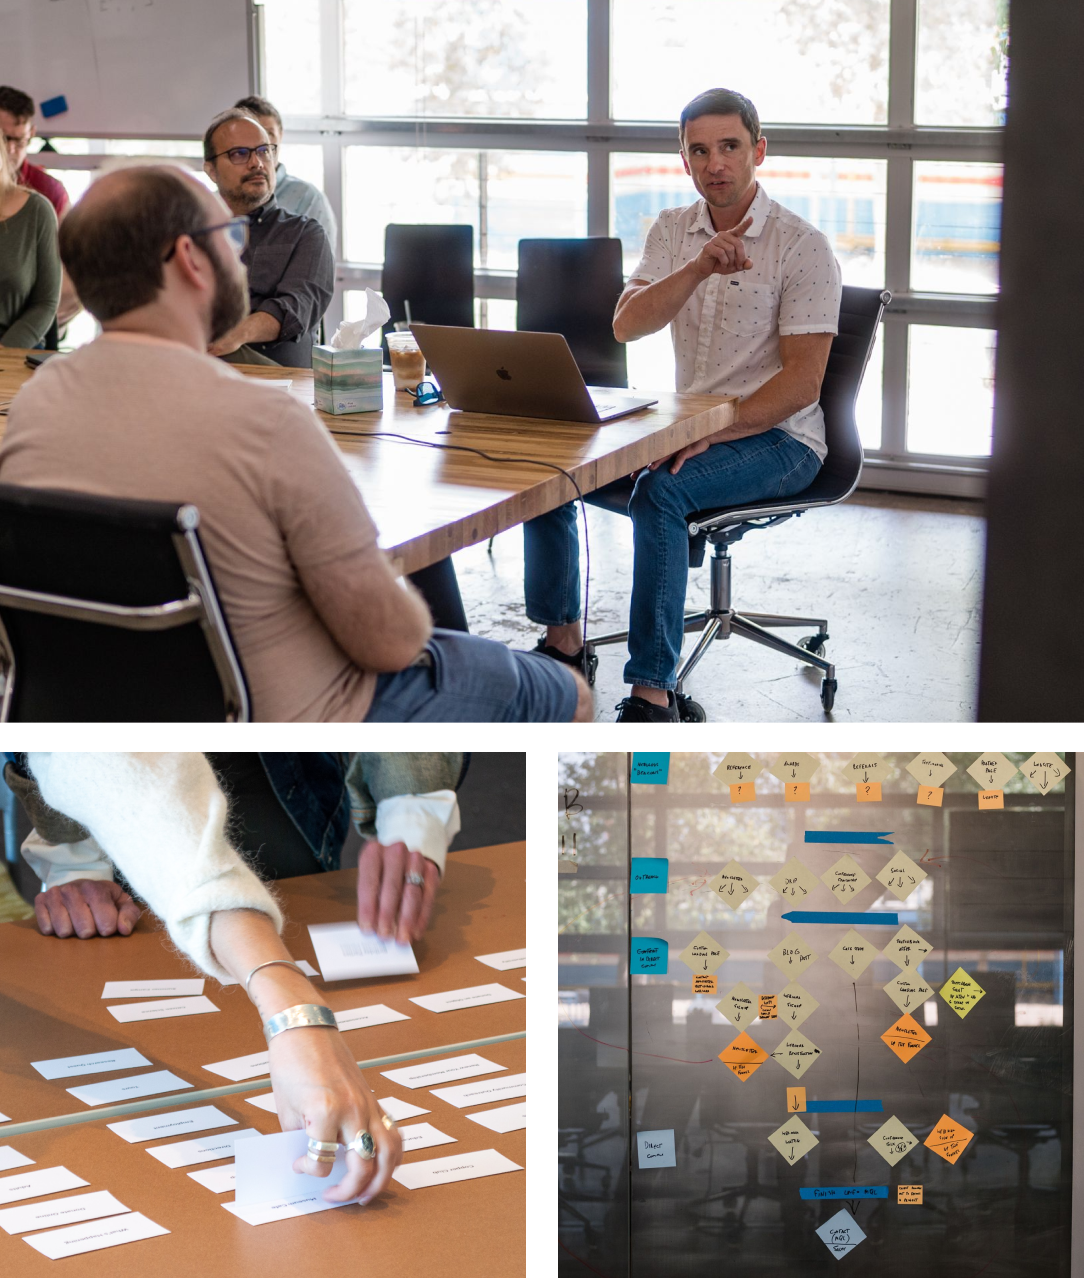 A collage of 3 photos. The first is of Aten CEO, Justin Toupin, giving a presentation to a team of people sitting around a conference table. The second is a close-up of a card sorting exercise. The third is of a marketing strategy constructed of sticky notes.